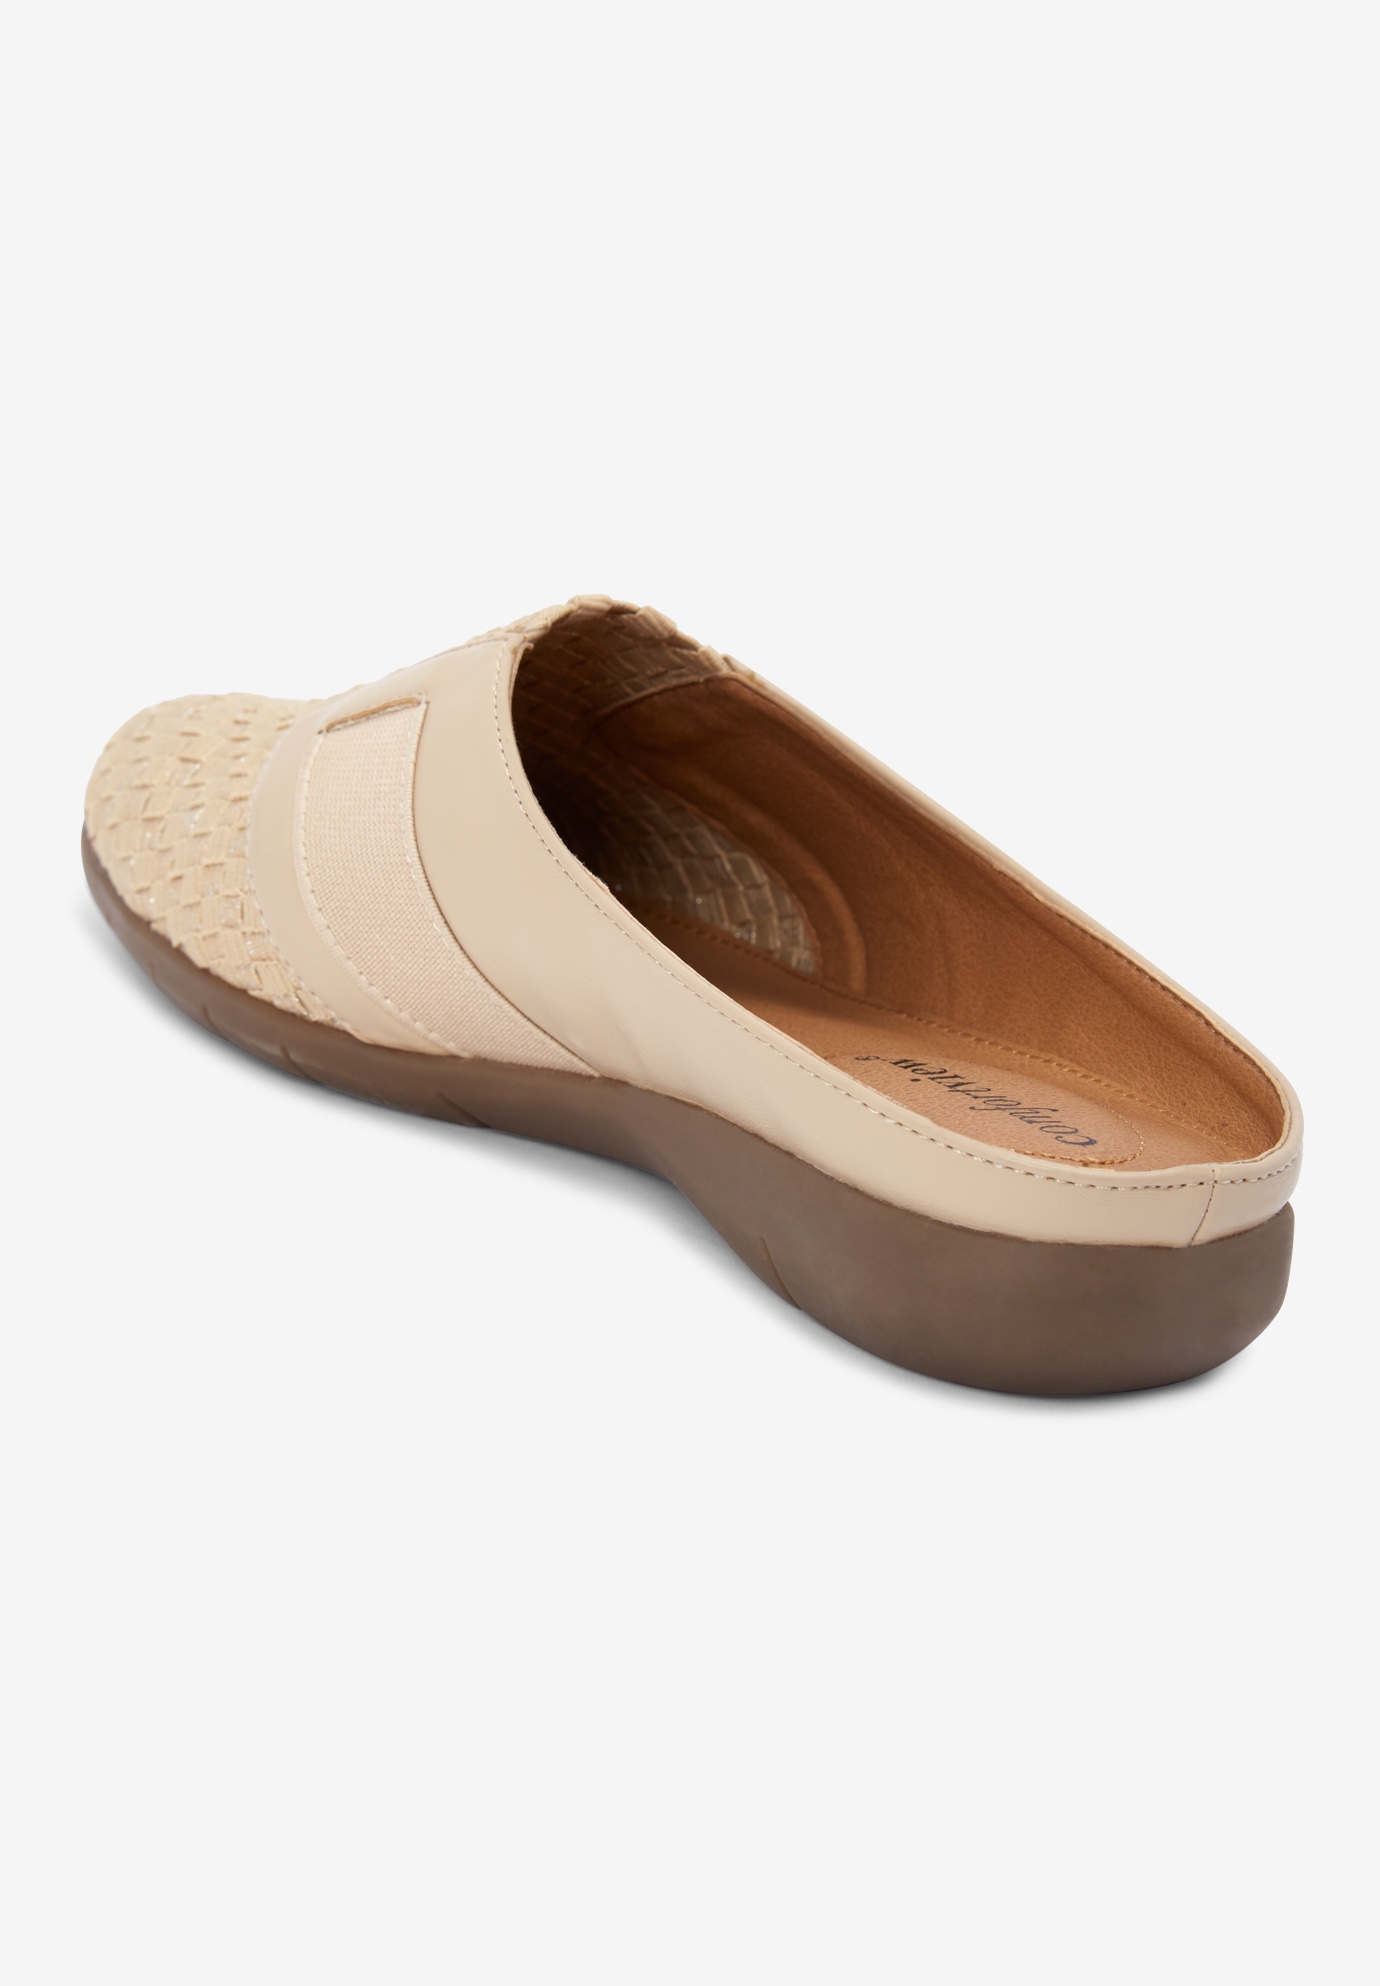 Comfortview Women's Wide Width The Lola Mule Shoes - image 3 of 7